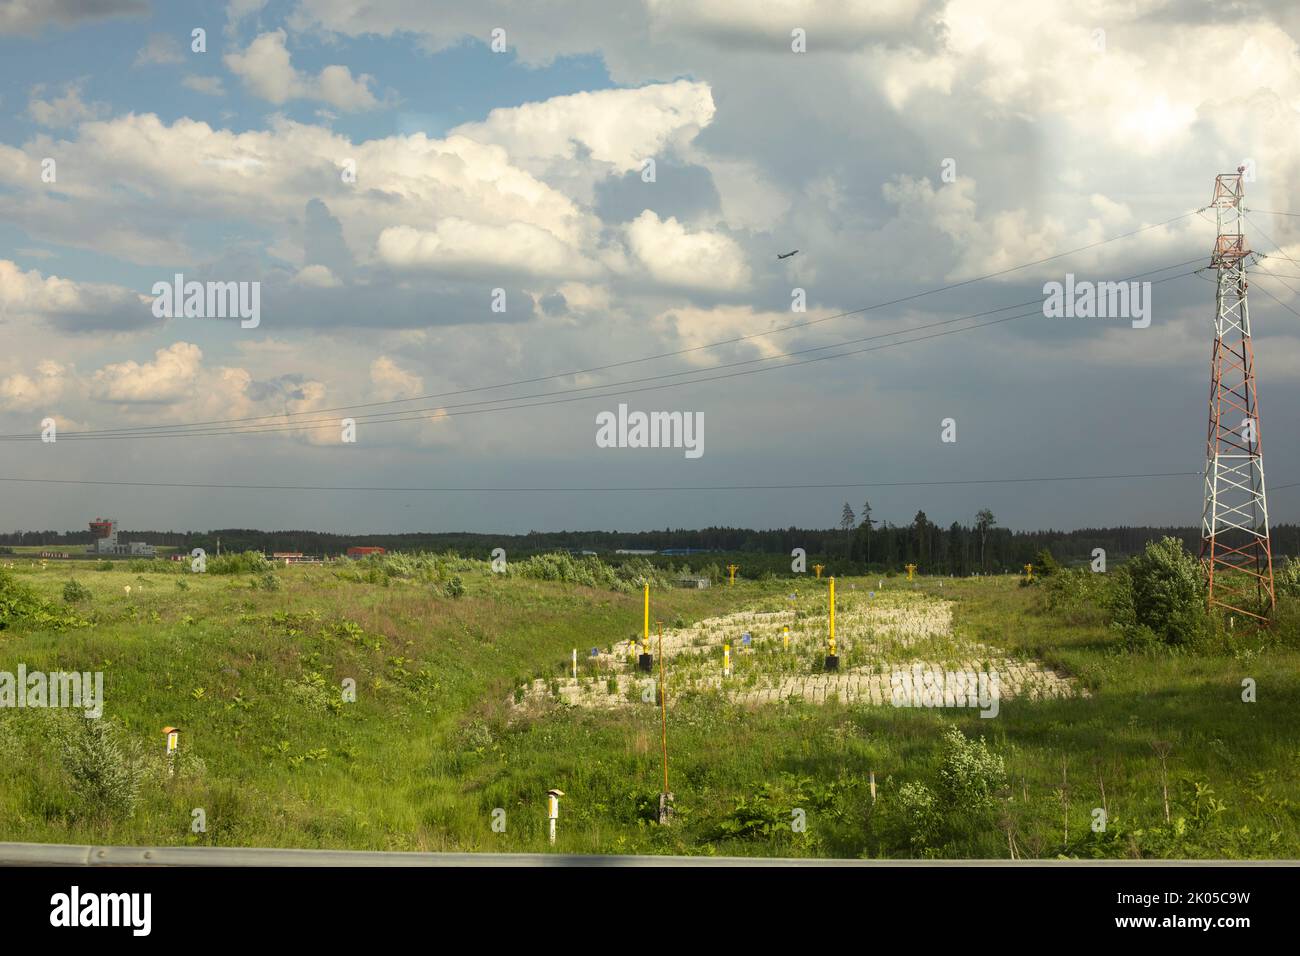 Communication tower in field. Details of radio infrastructure. Signal transmission antenna. Stock Photo